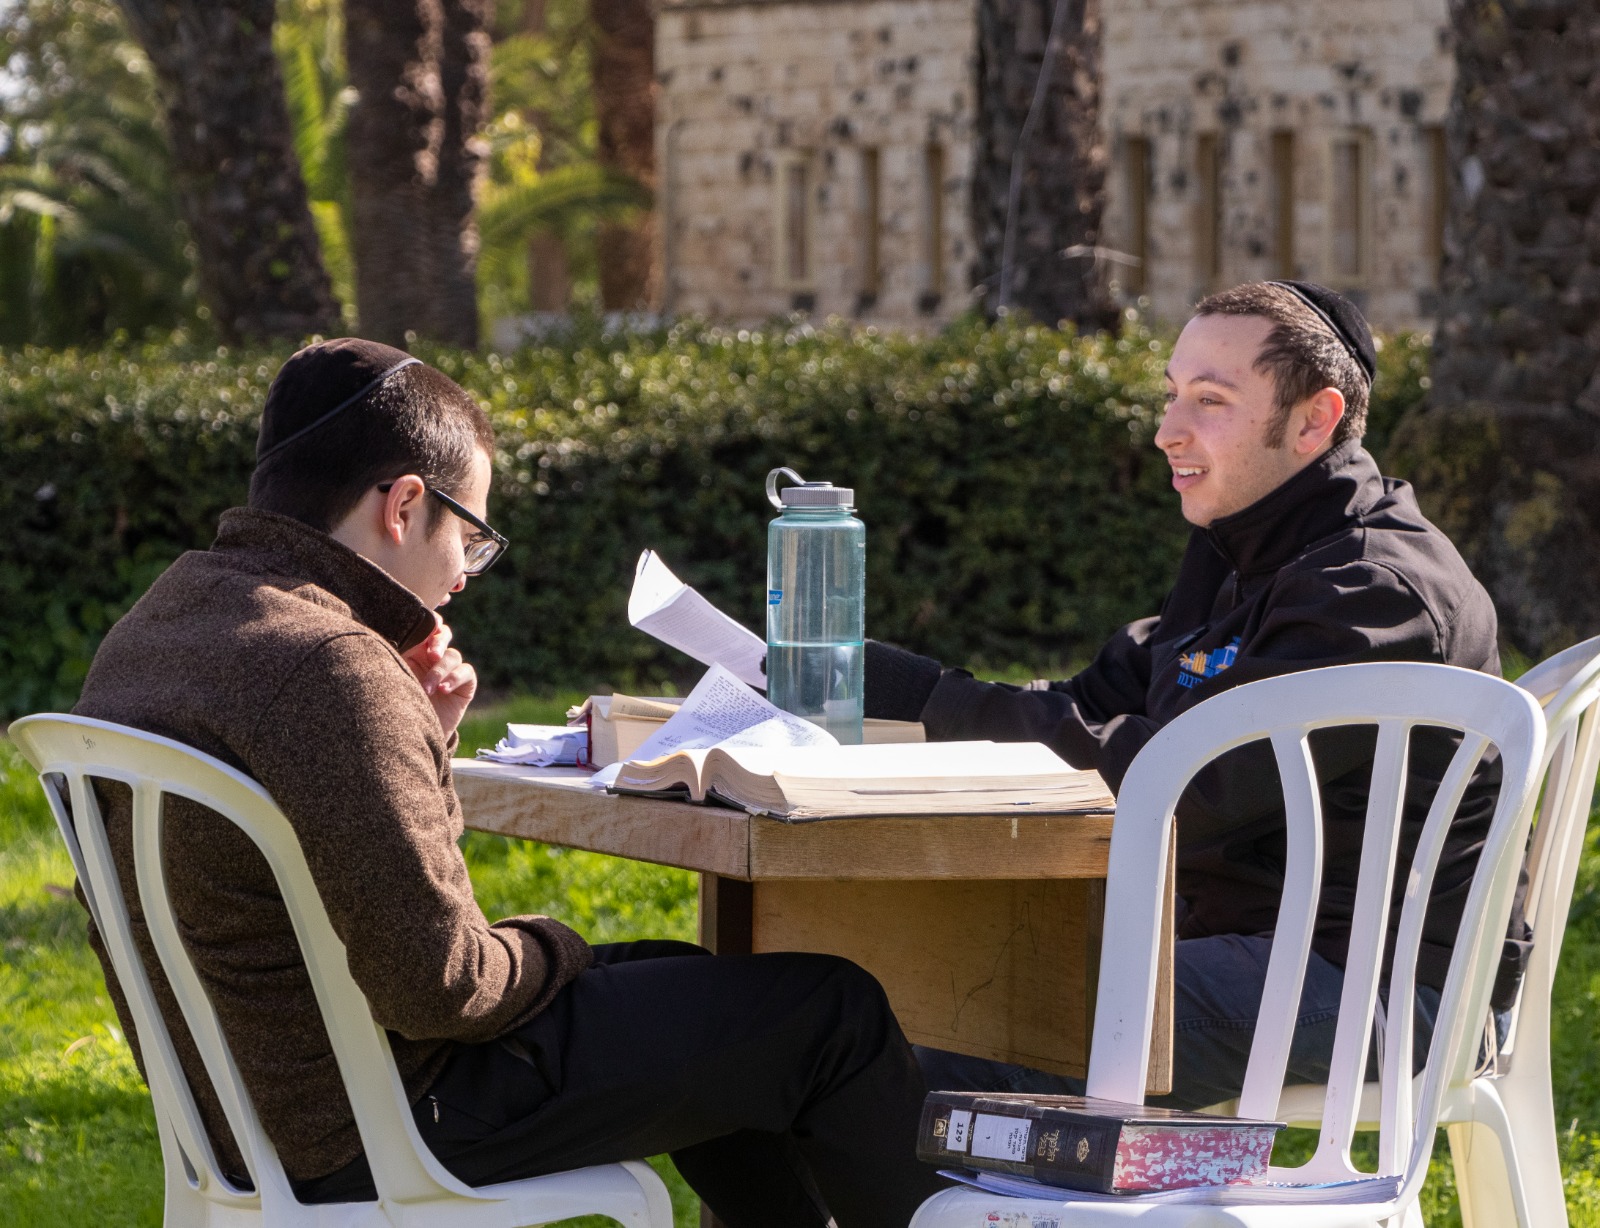 Some of the shiurim and chavrutot took place outdoors as a precaution